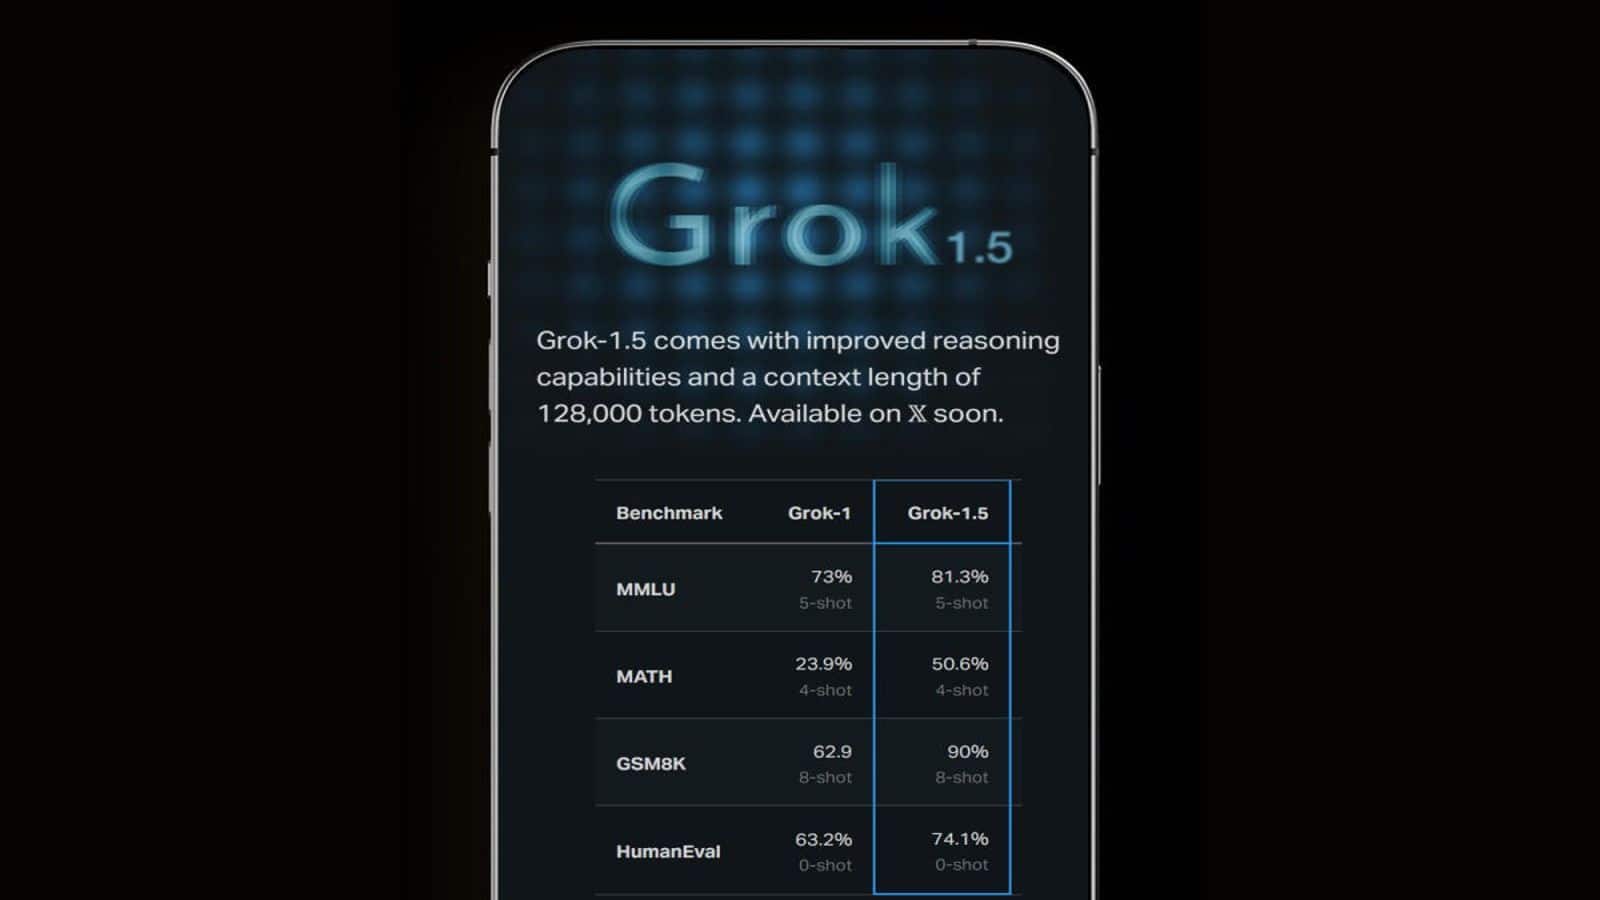 Elon Musk's xAI launches Grok-1.5V with advanced image processing capabilities